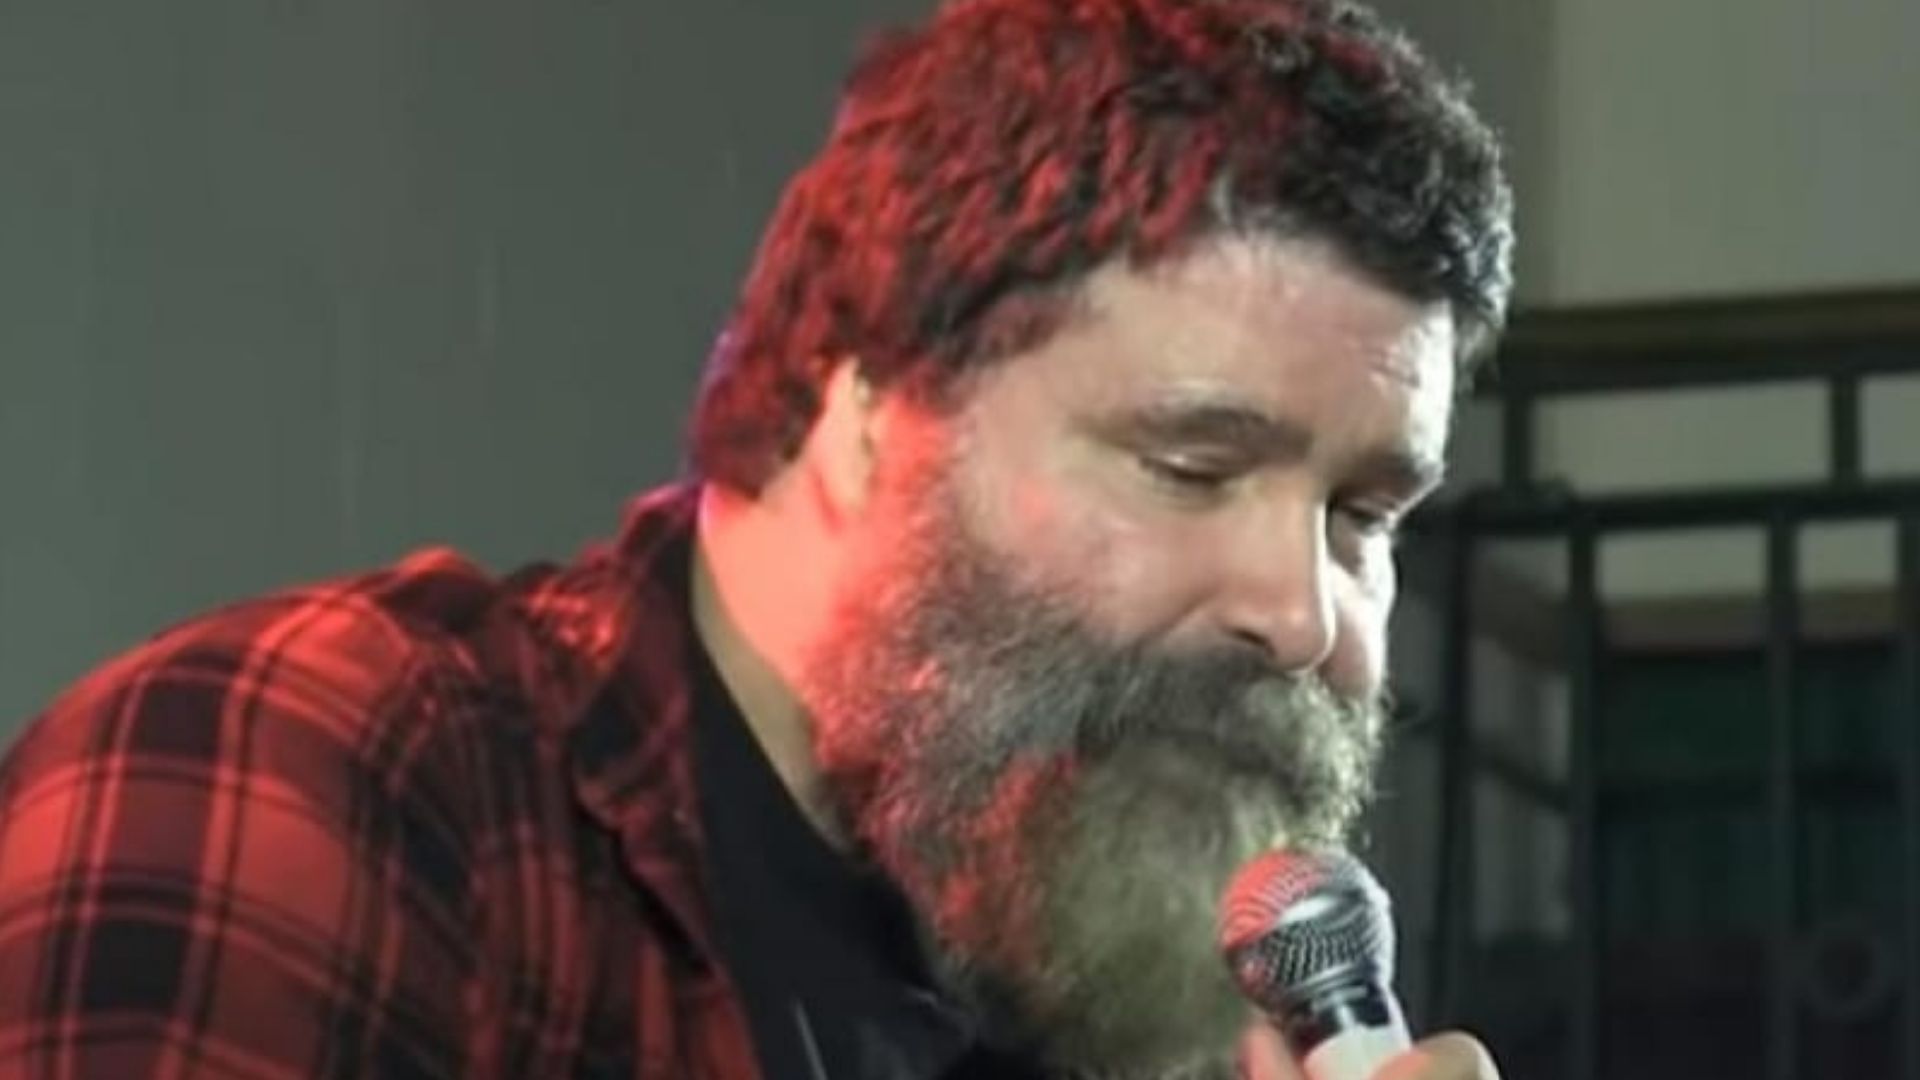 Mick Foley has always been a top star in the company